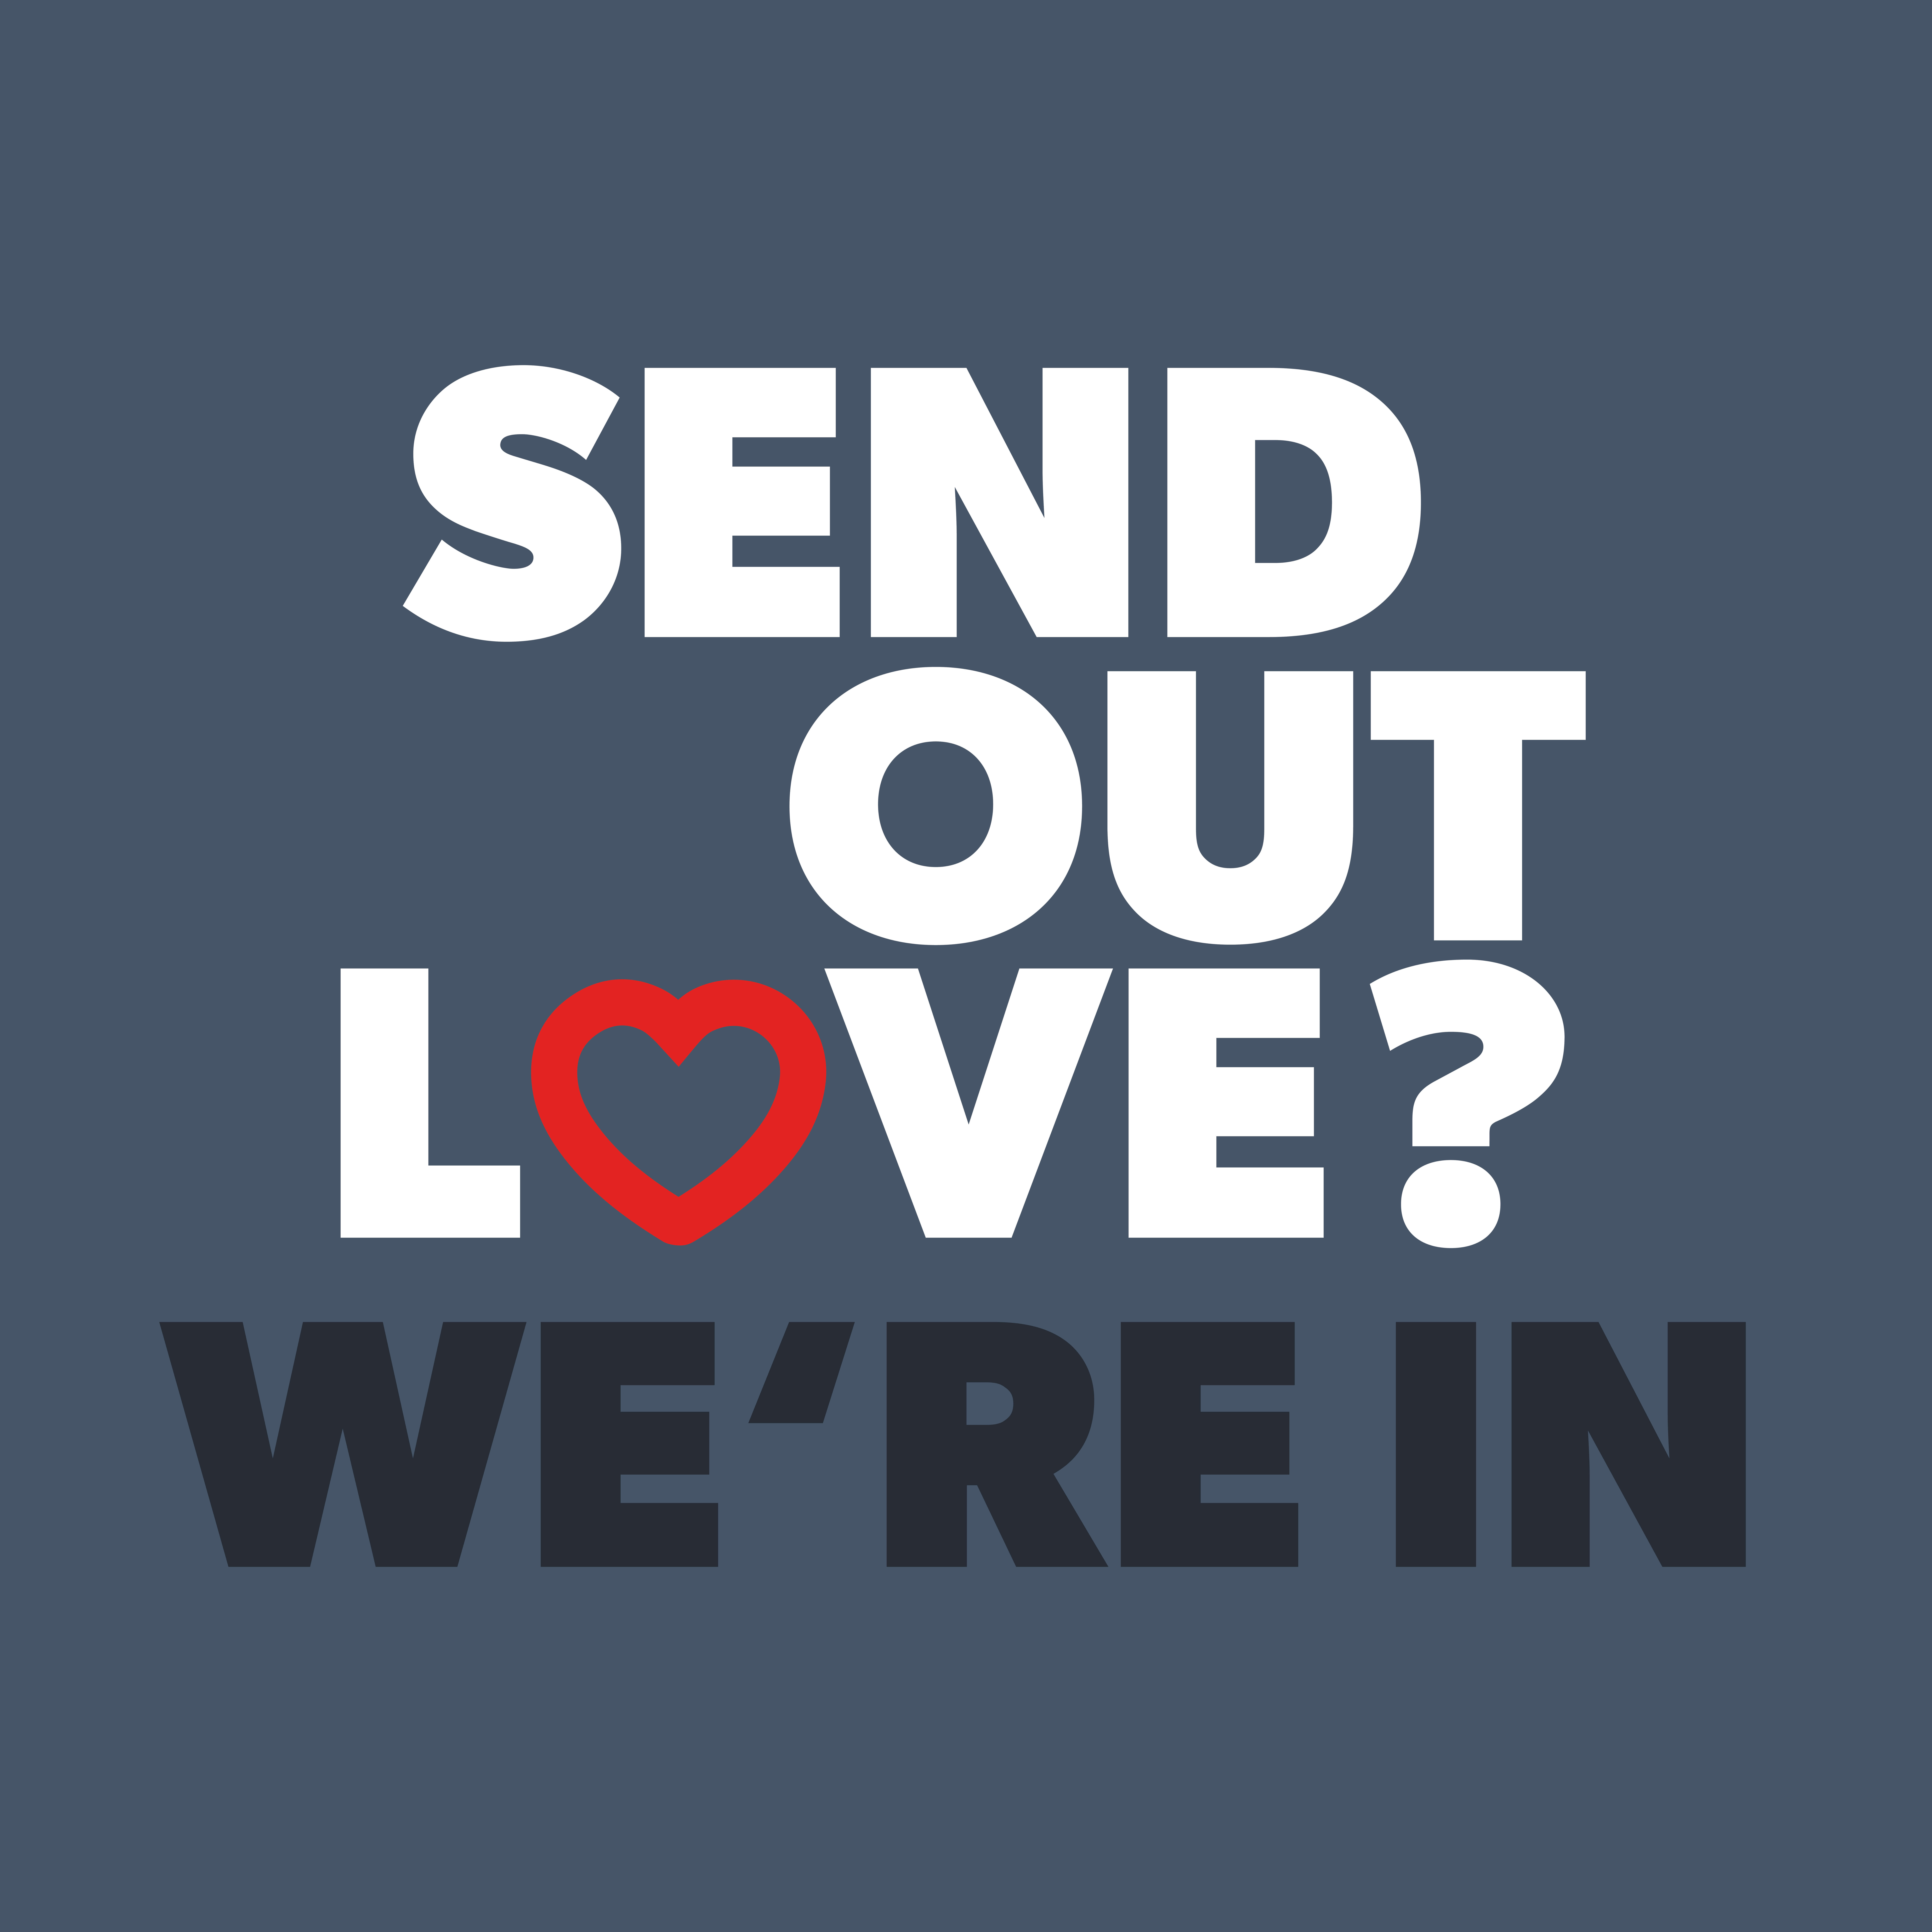 SEND OUT LOVE